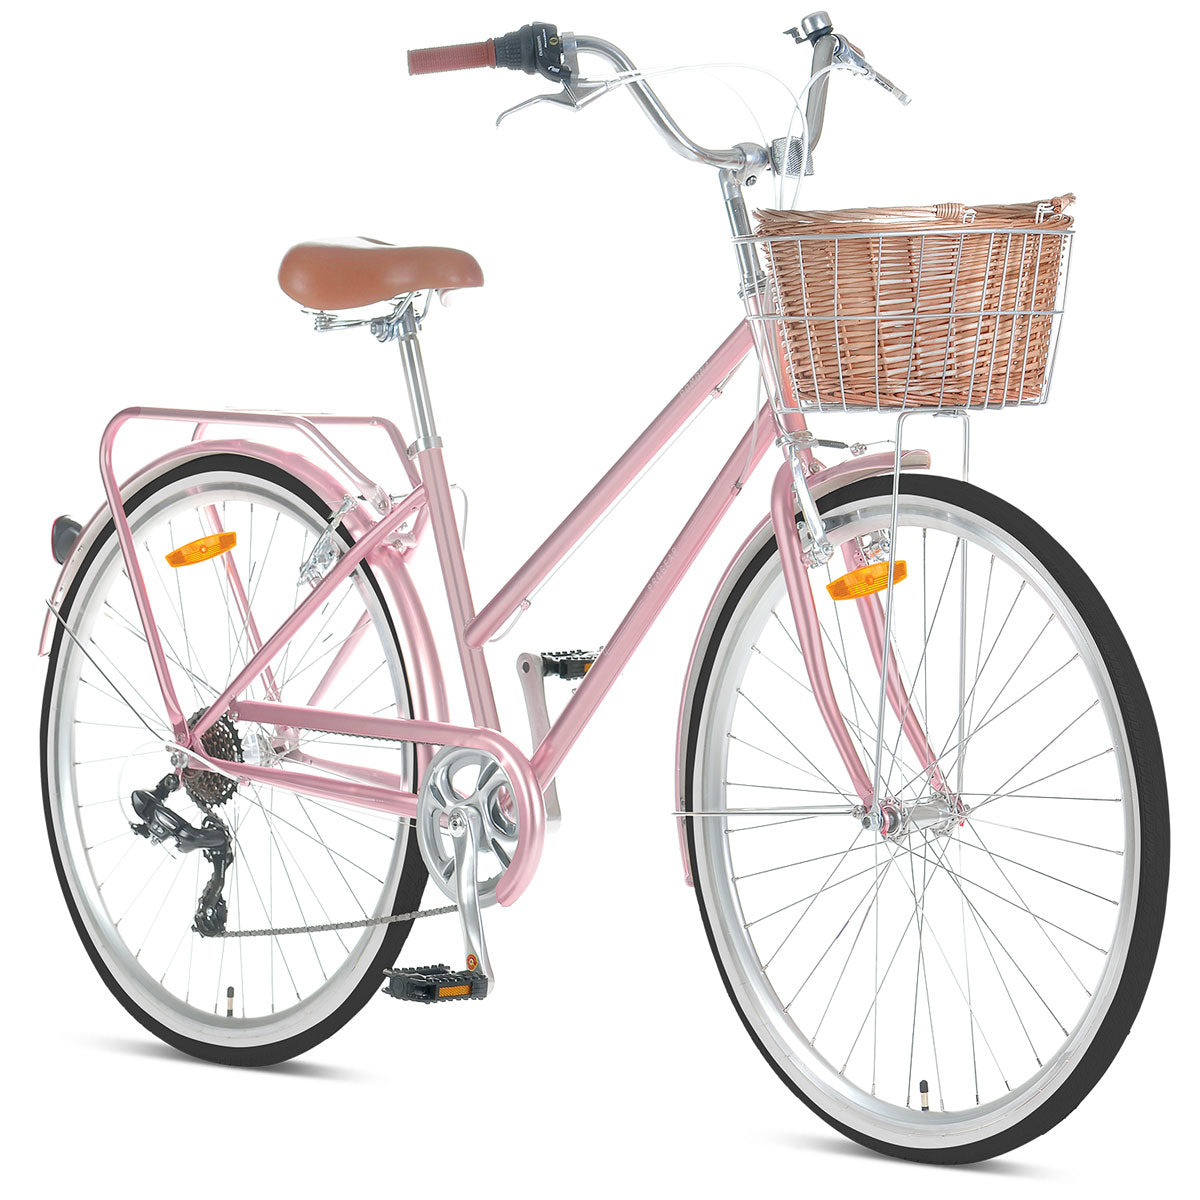 Pomona Vintage Cruiser Commuter Bike Rose Gold with Front Basket (Small, 15")